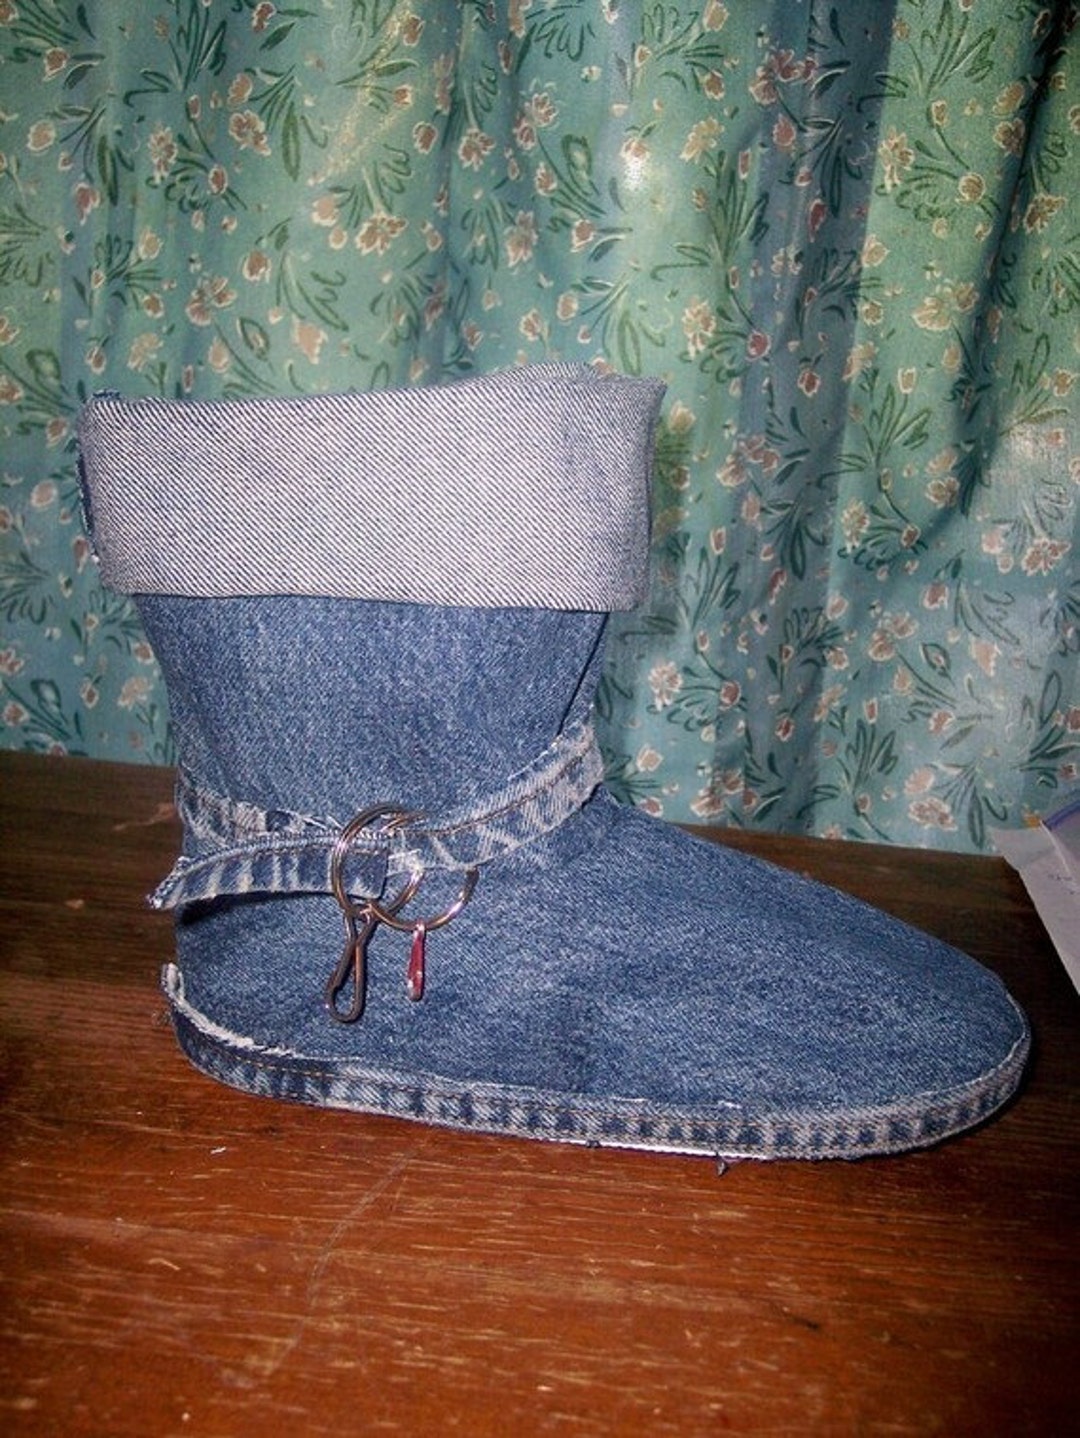 Boots Patternsewingdenim ANKLE Bootsso Cute - Etsy